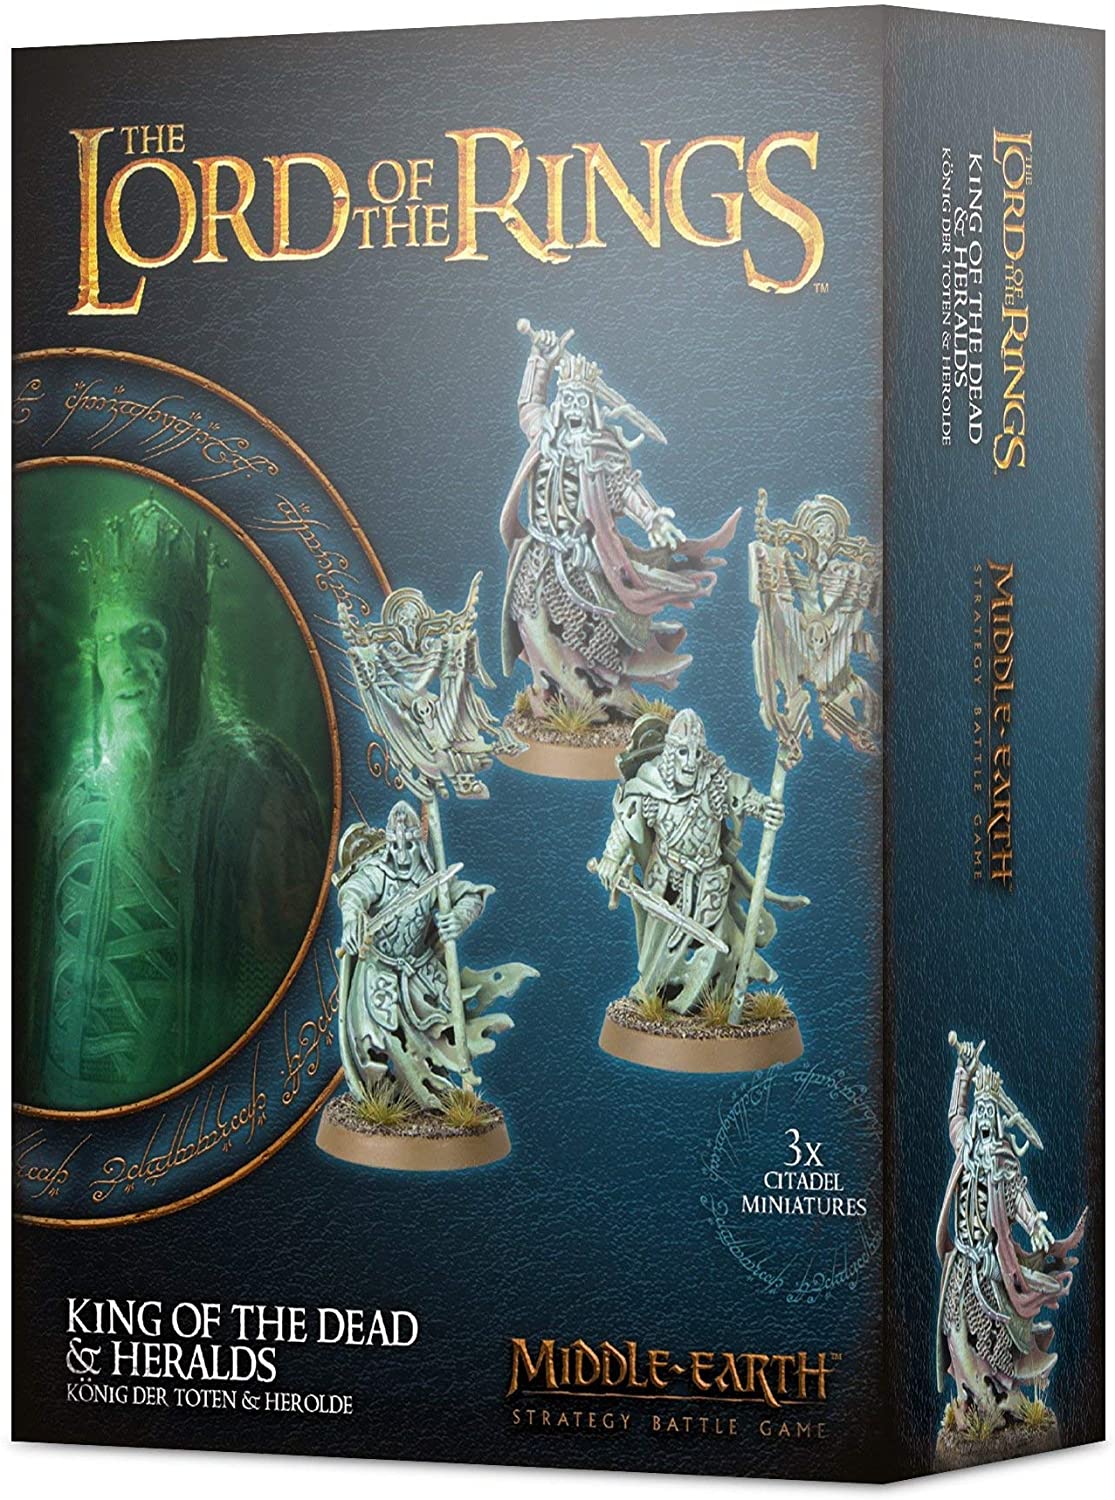 Middle-Earth: Strategy Battle Game - King of the Dead & Heralds